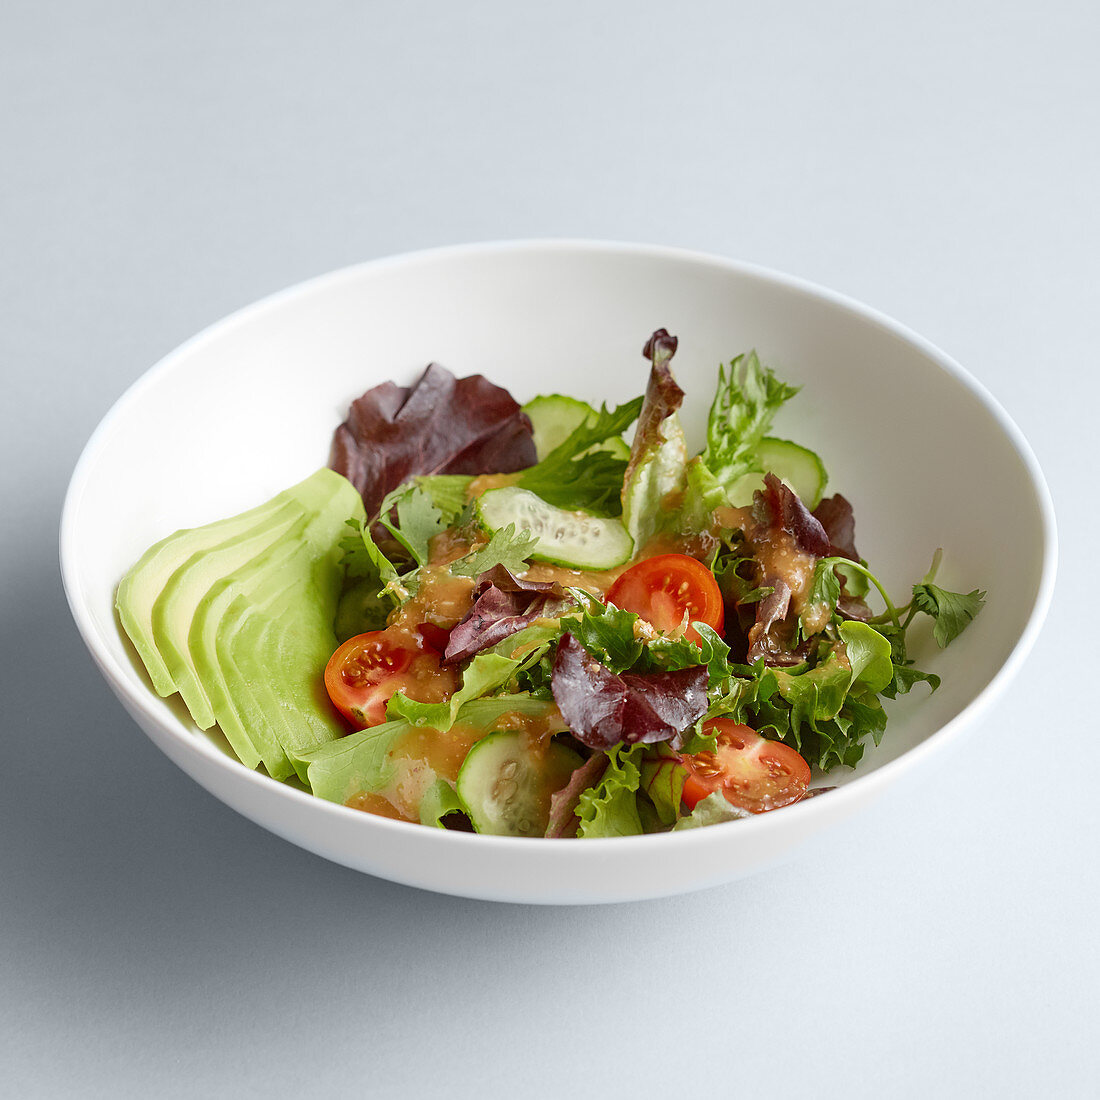 A mixed salad with cucumber and tomatoes in a bowl against a white surface